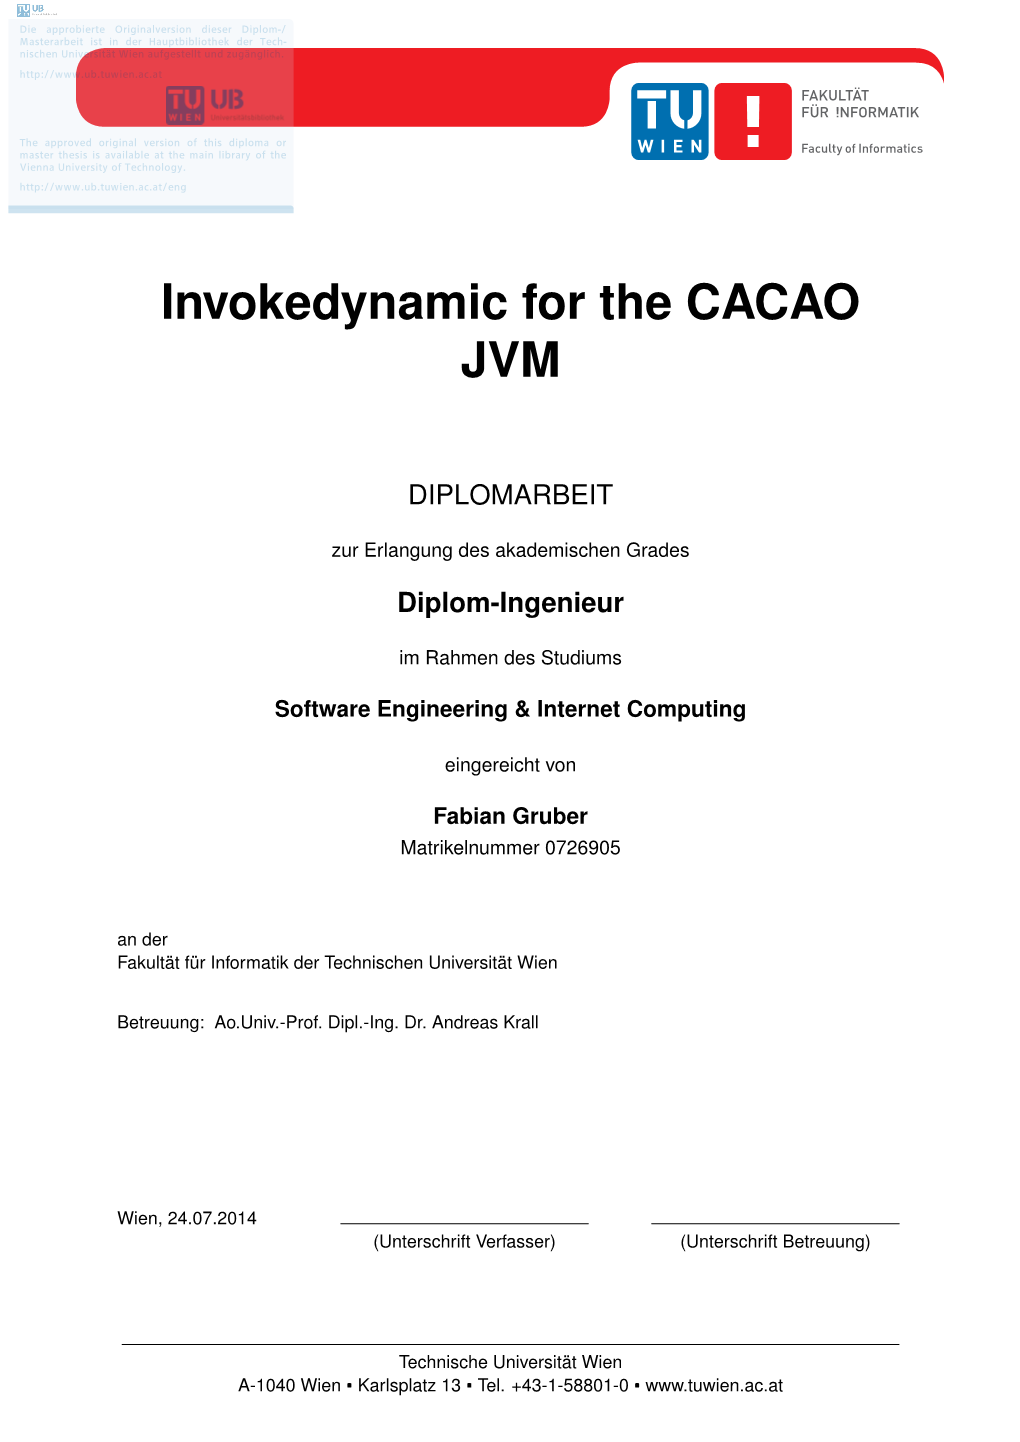 Invokedynamic for the CACAO JVM